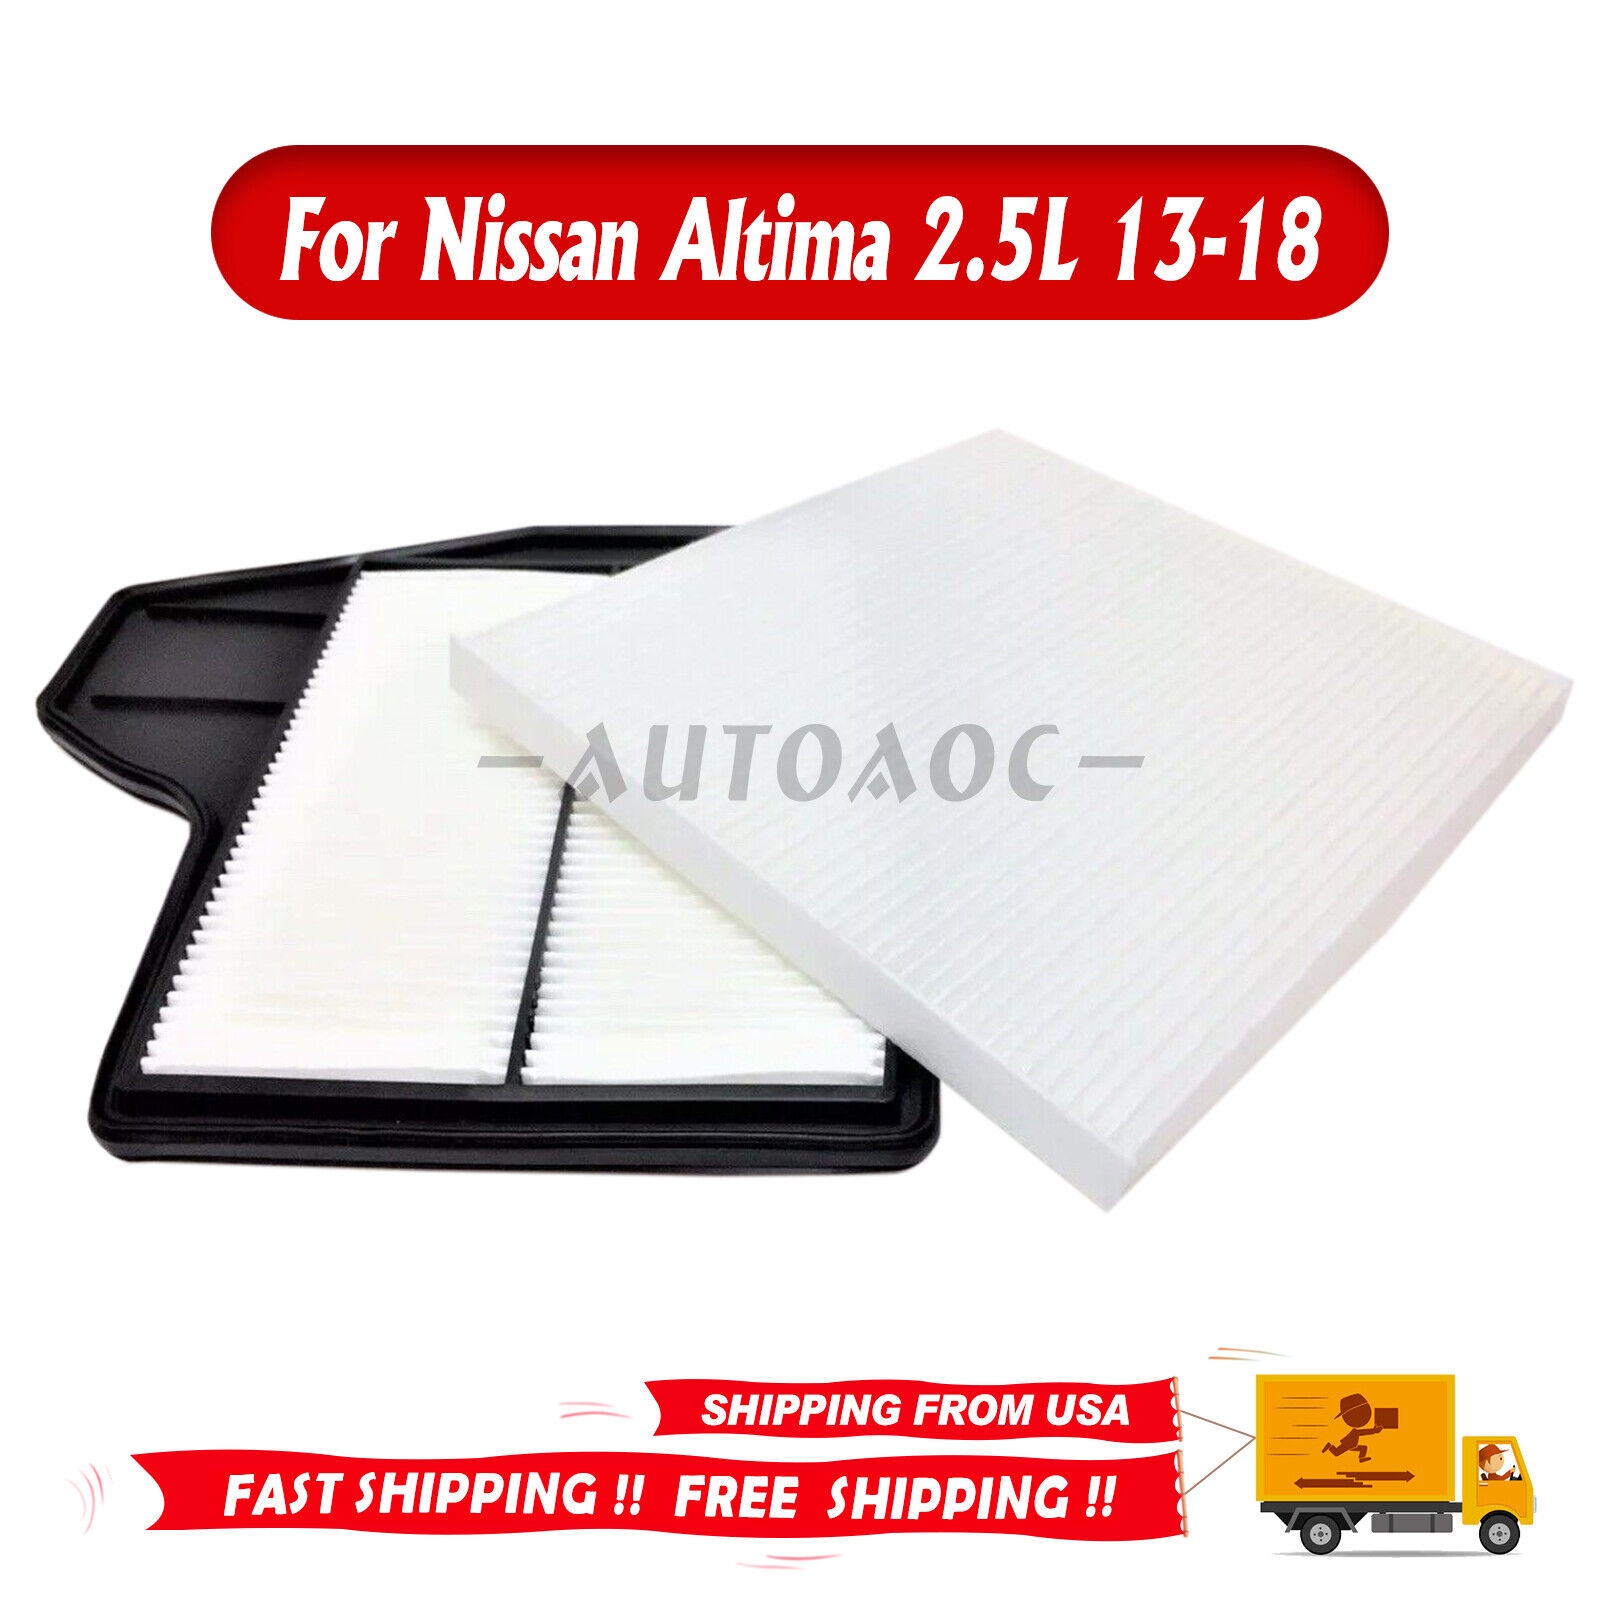 For Nissan Altima 2.5L 12 2013-2018 Combo Set Engine Air & Cabin Air Filter US